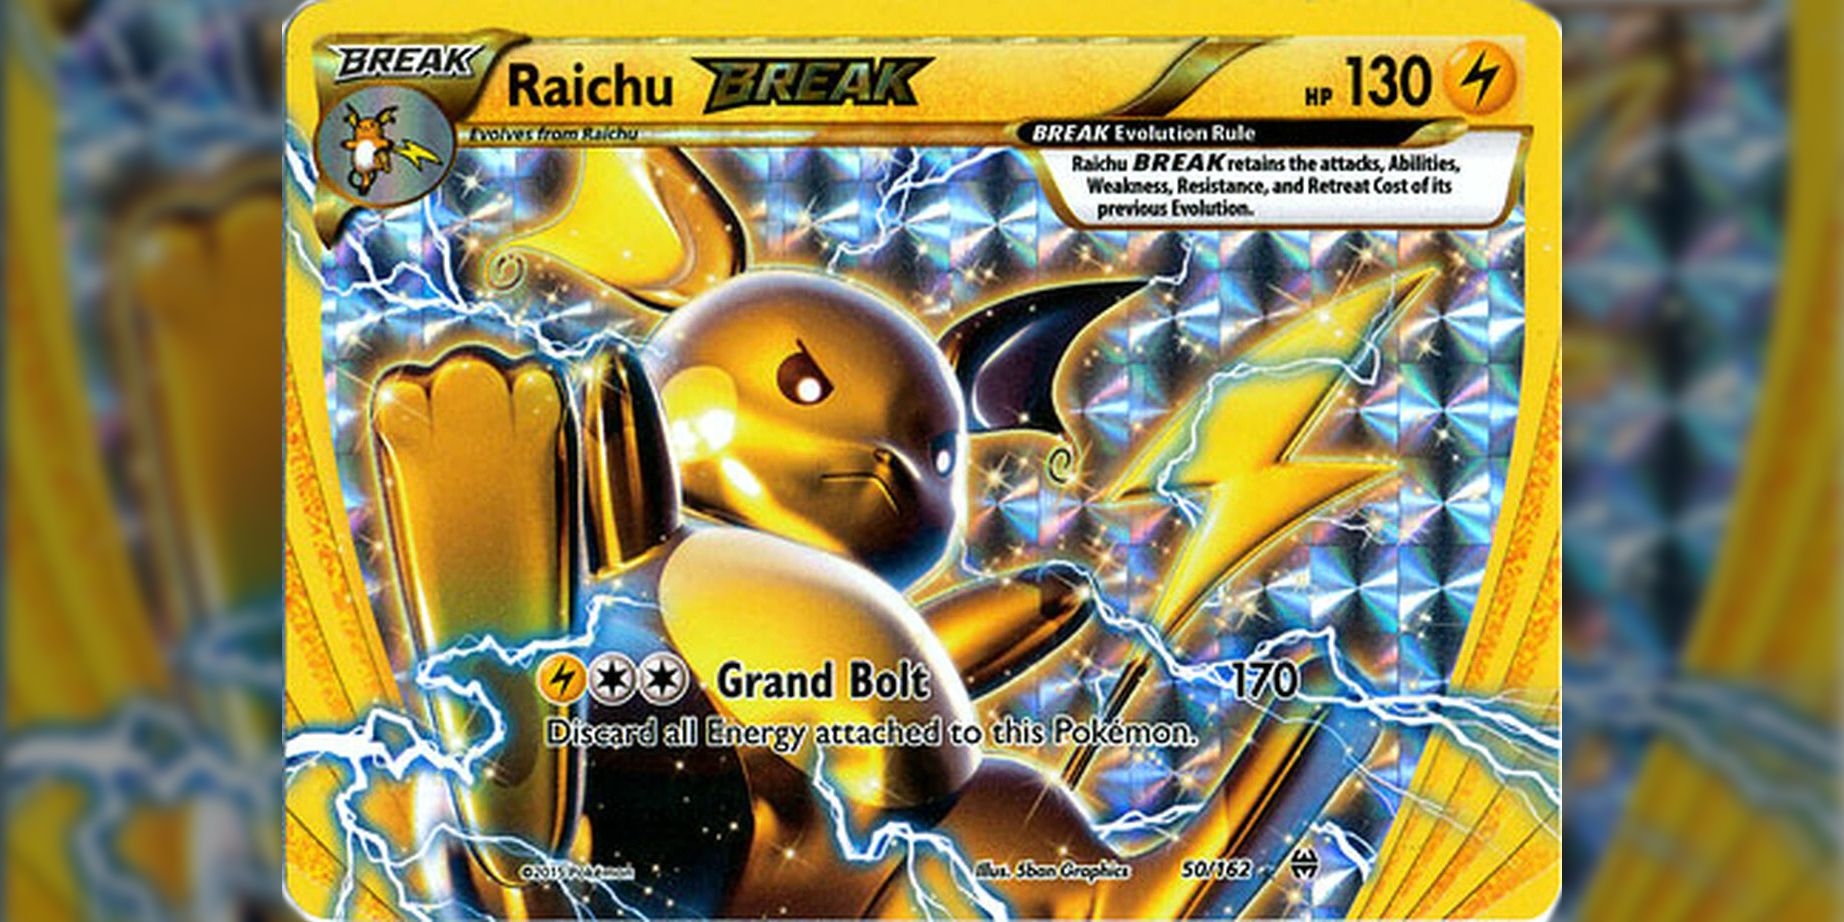 lightning type pokemon with a a great finale attack.